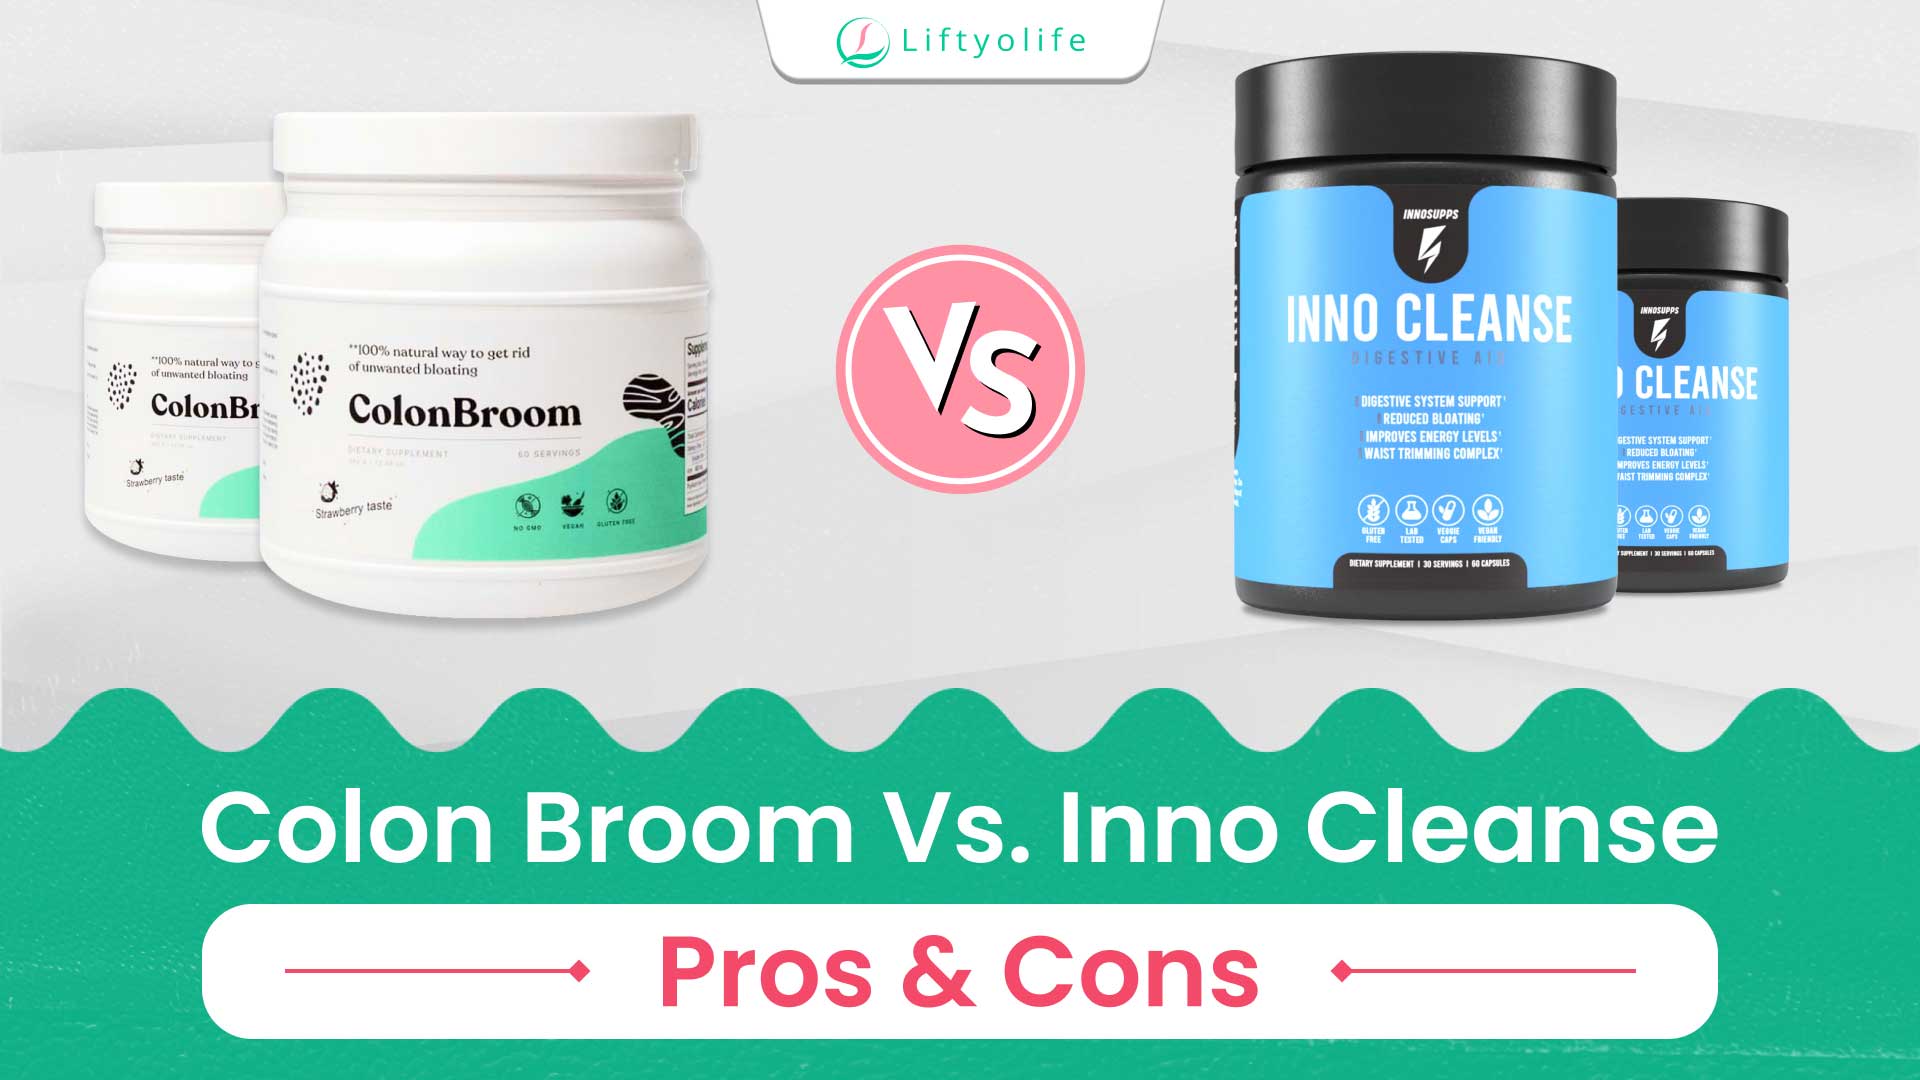 Colon Broom Vs Inno Cleanse: The Pros And Cons